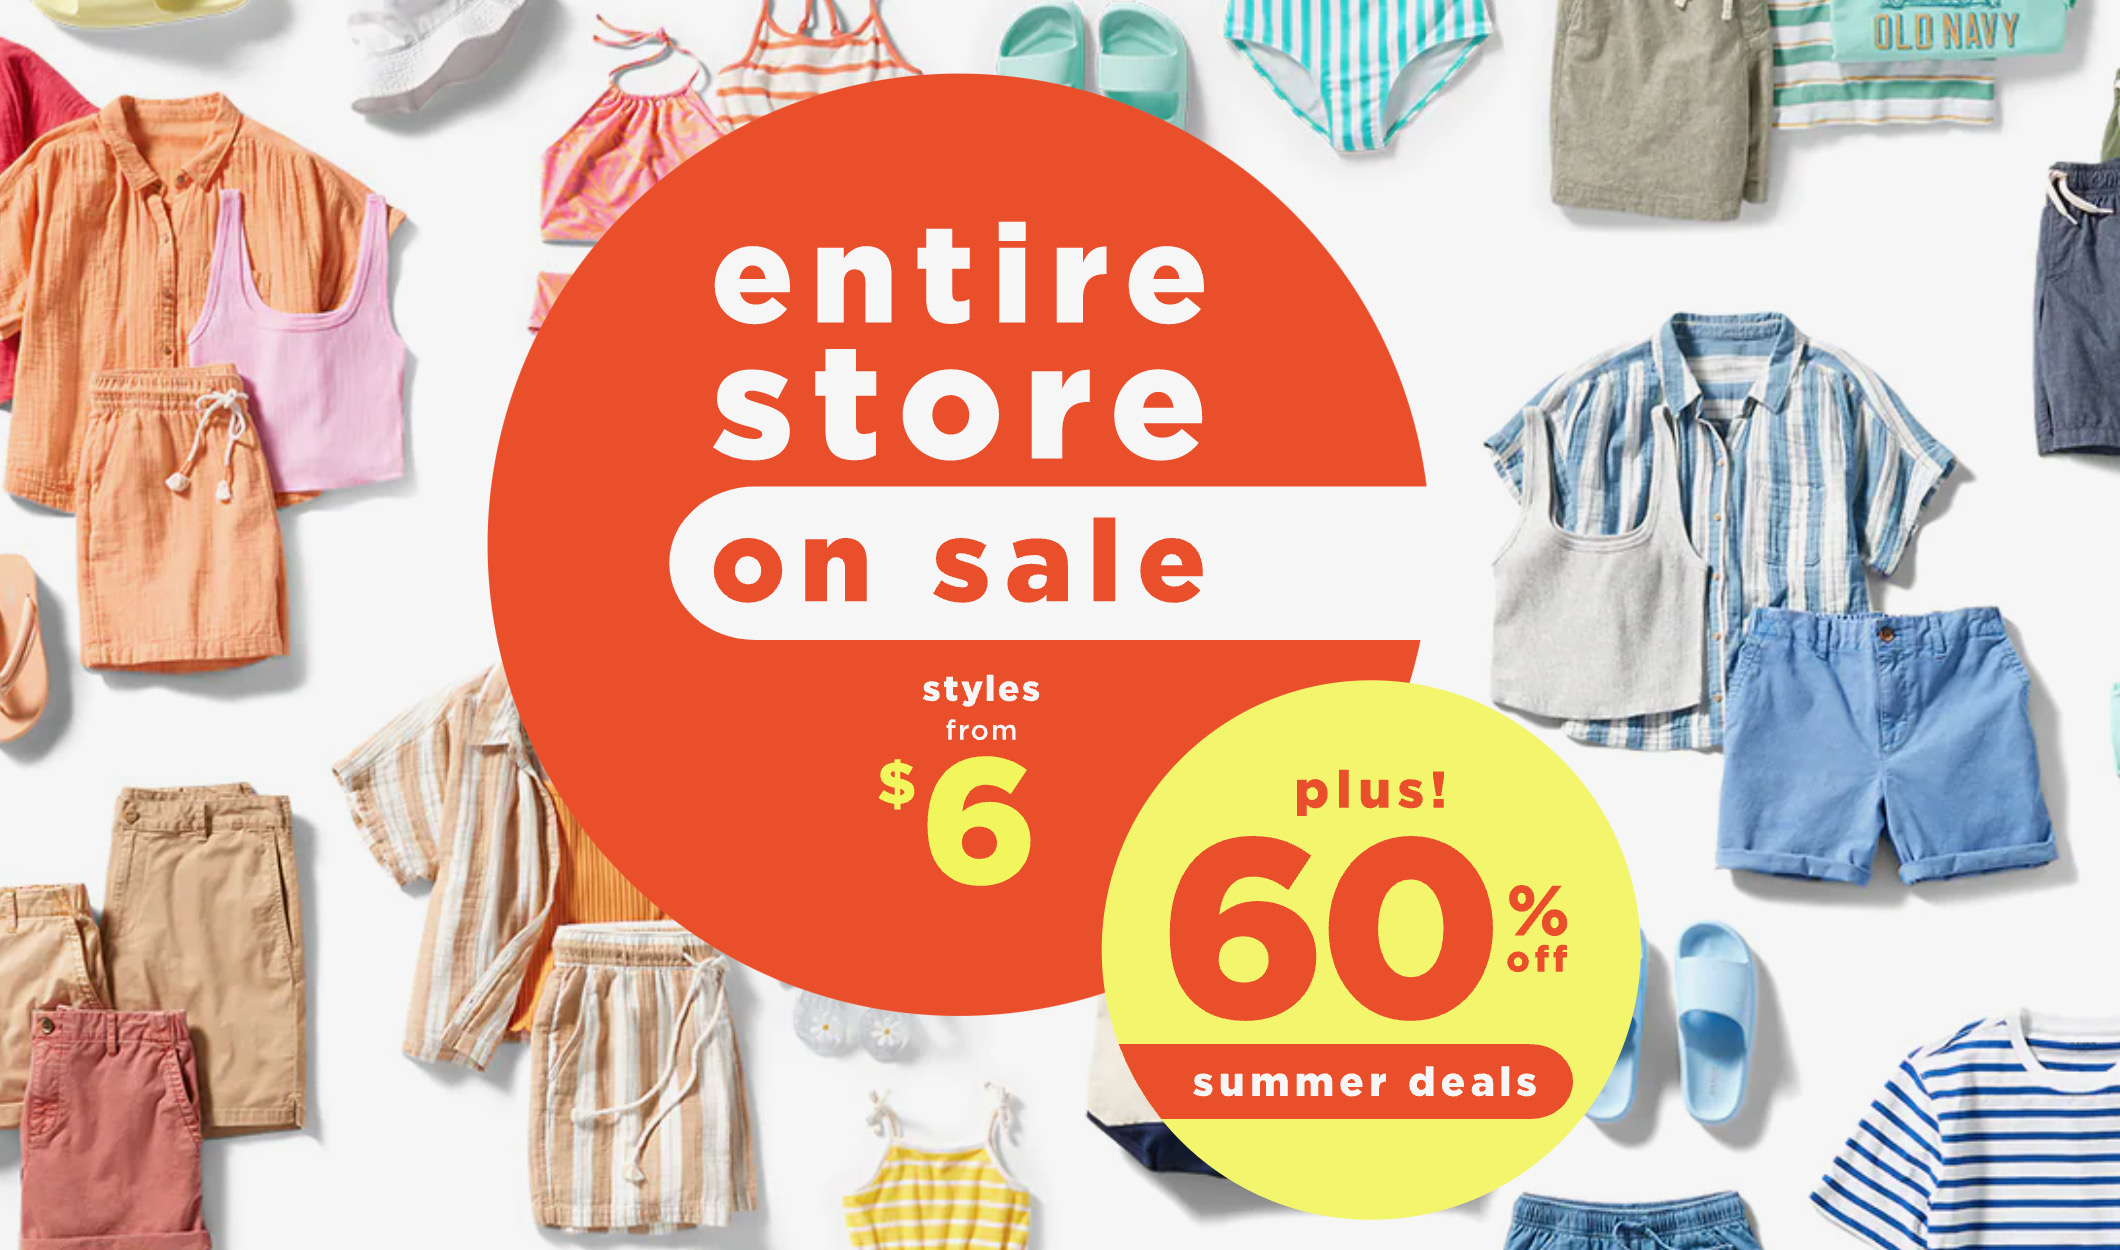 Old Navy: Sitewide Sale from $6 + 60% Off Summer Deals + Free Shipping on $50+